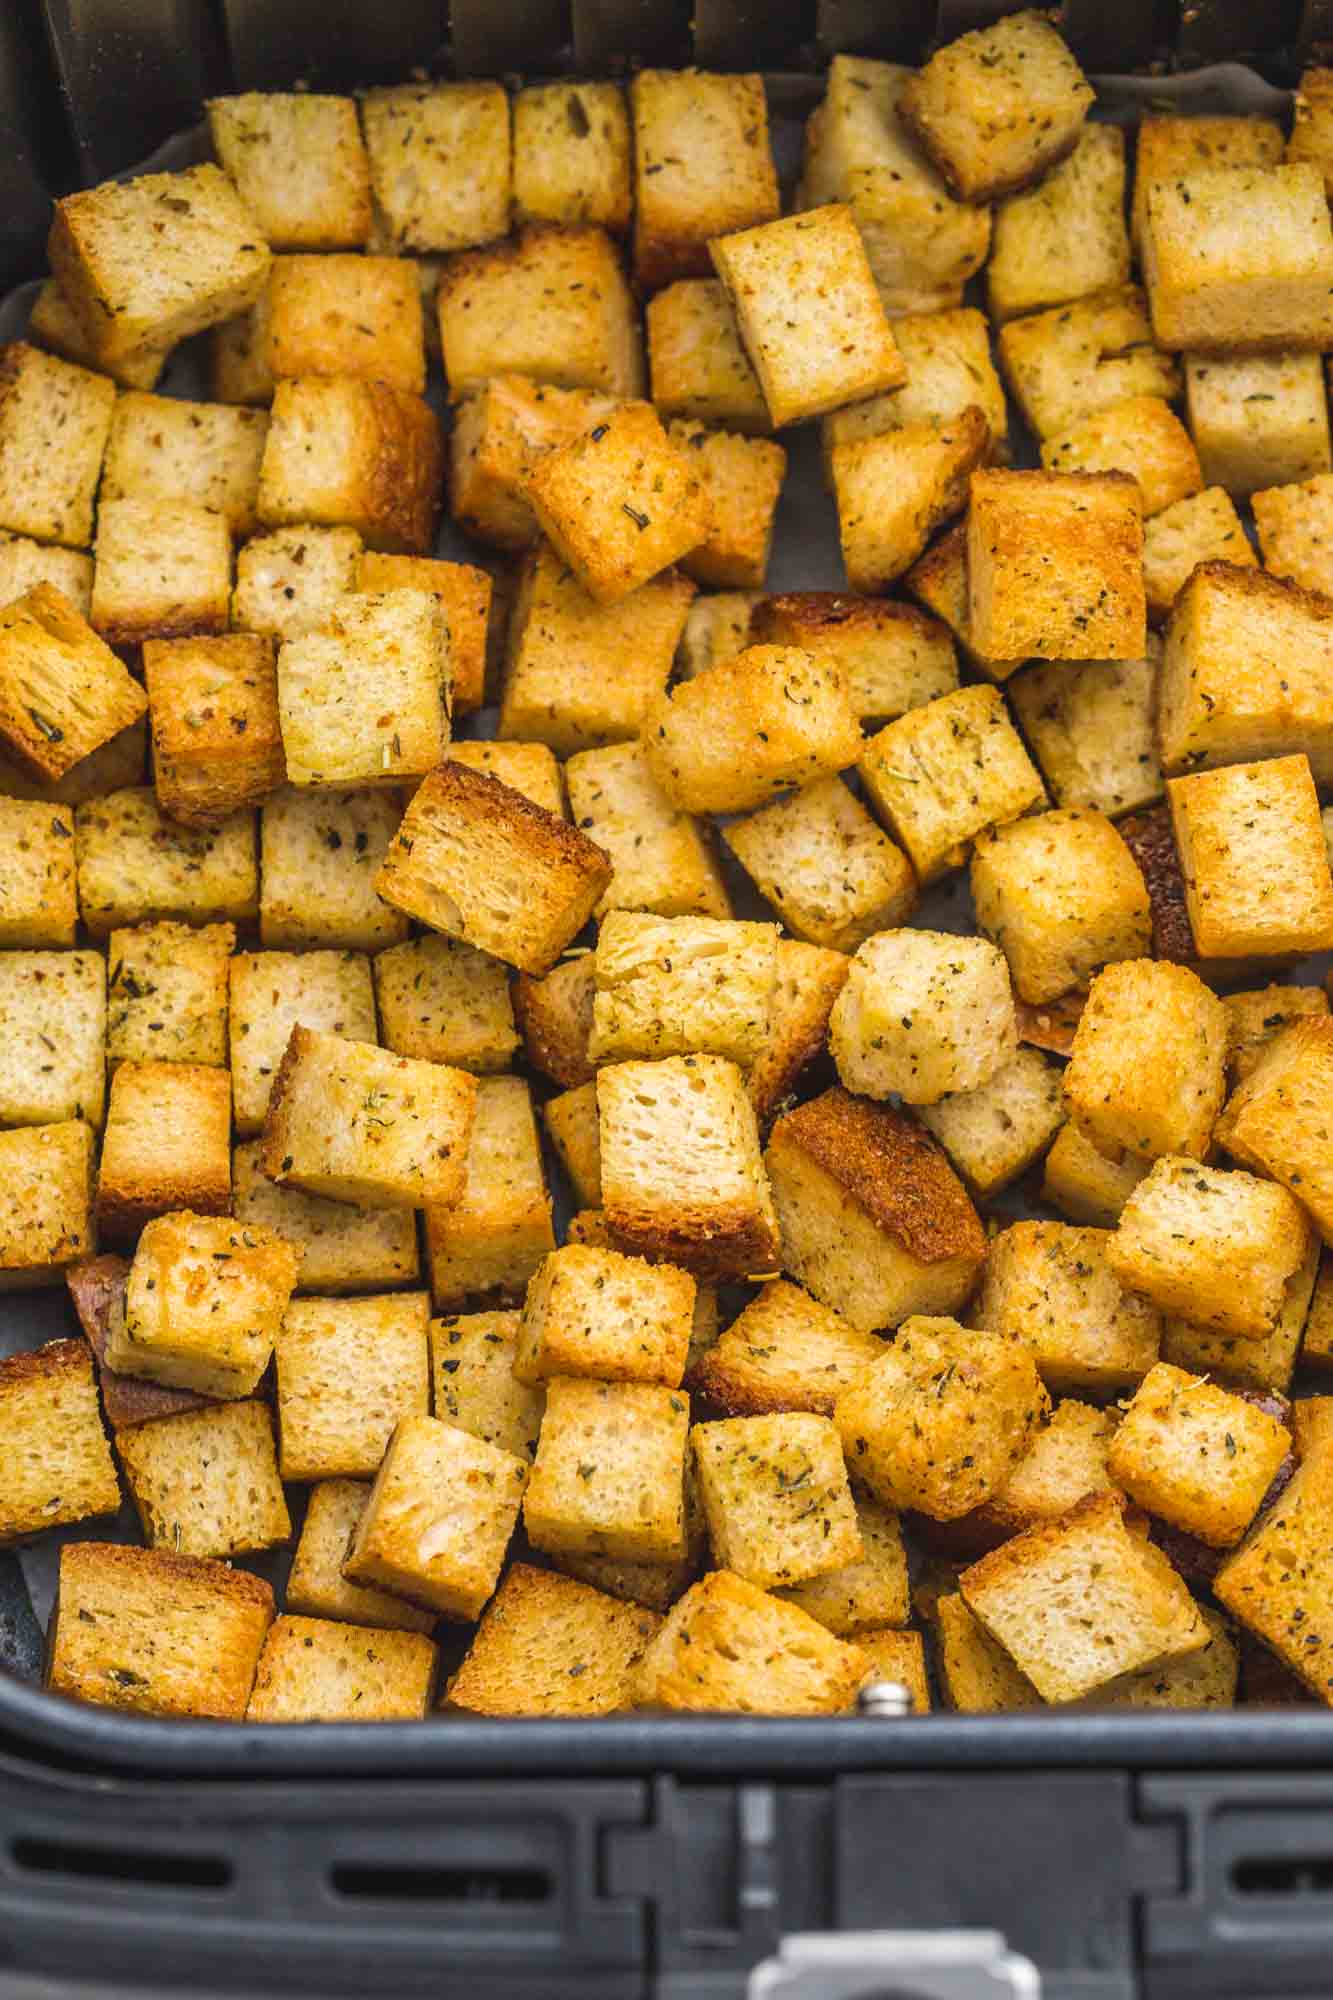 Golden brown croutons in the Air Fryer basket